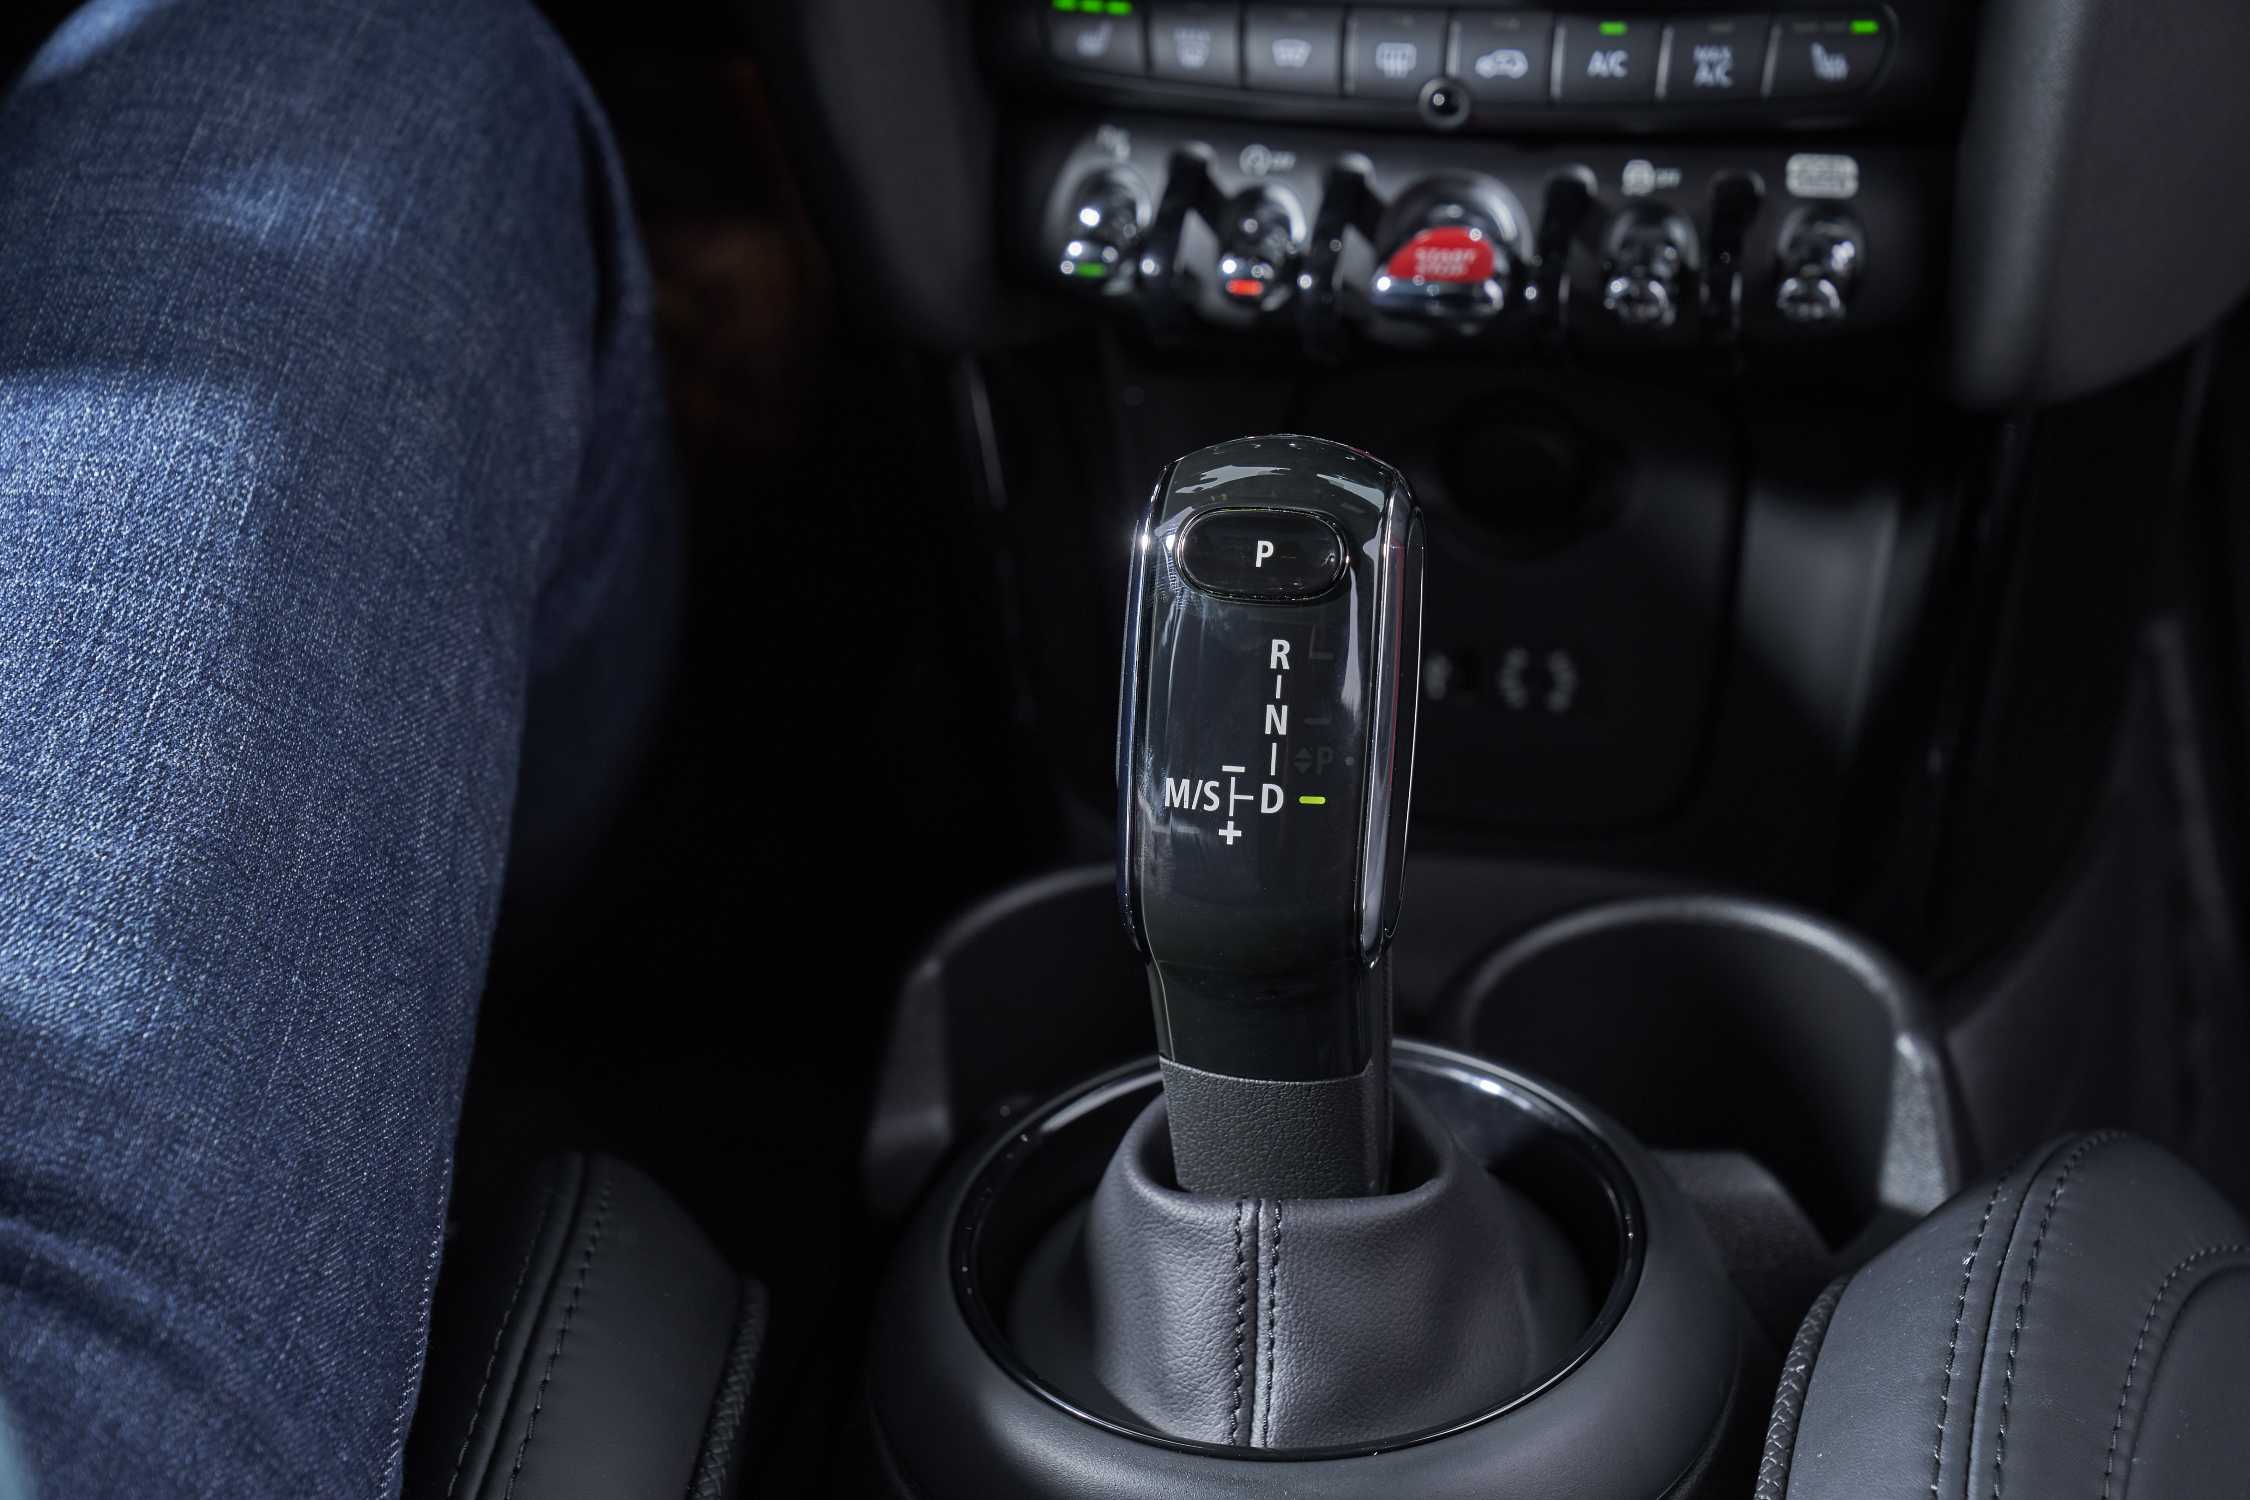 Double Clutch Transmission In The Mini Faster Gearshifts For Increased Driving Fun